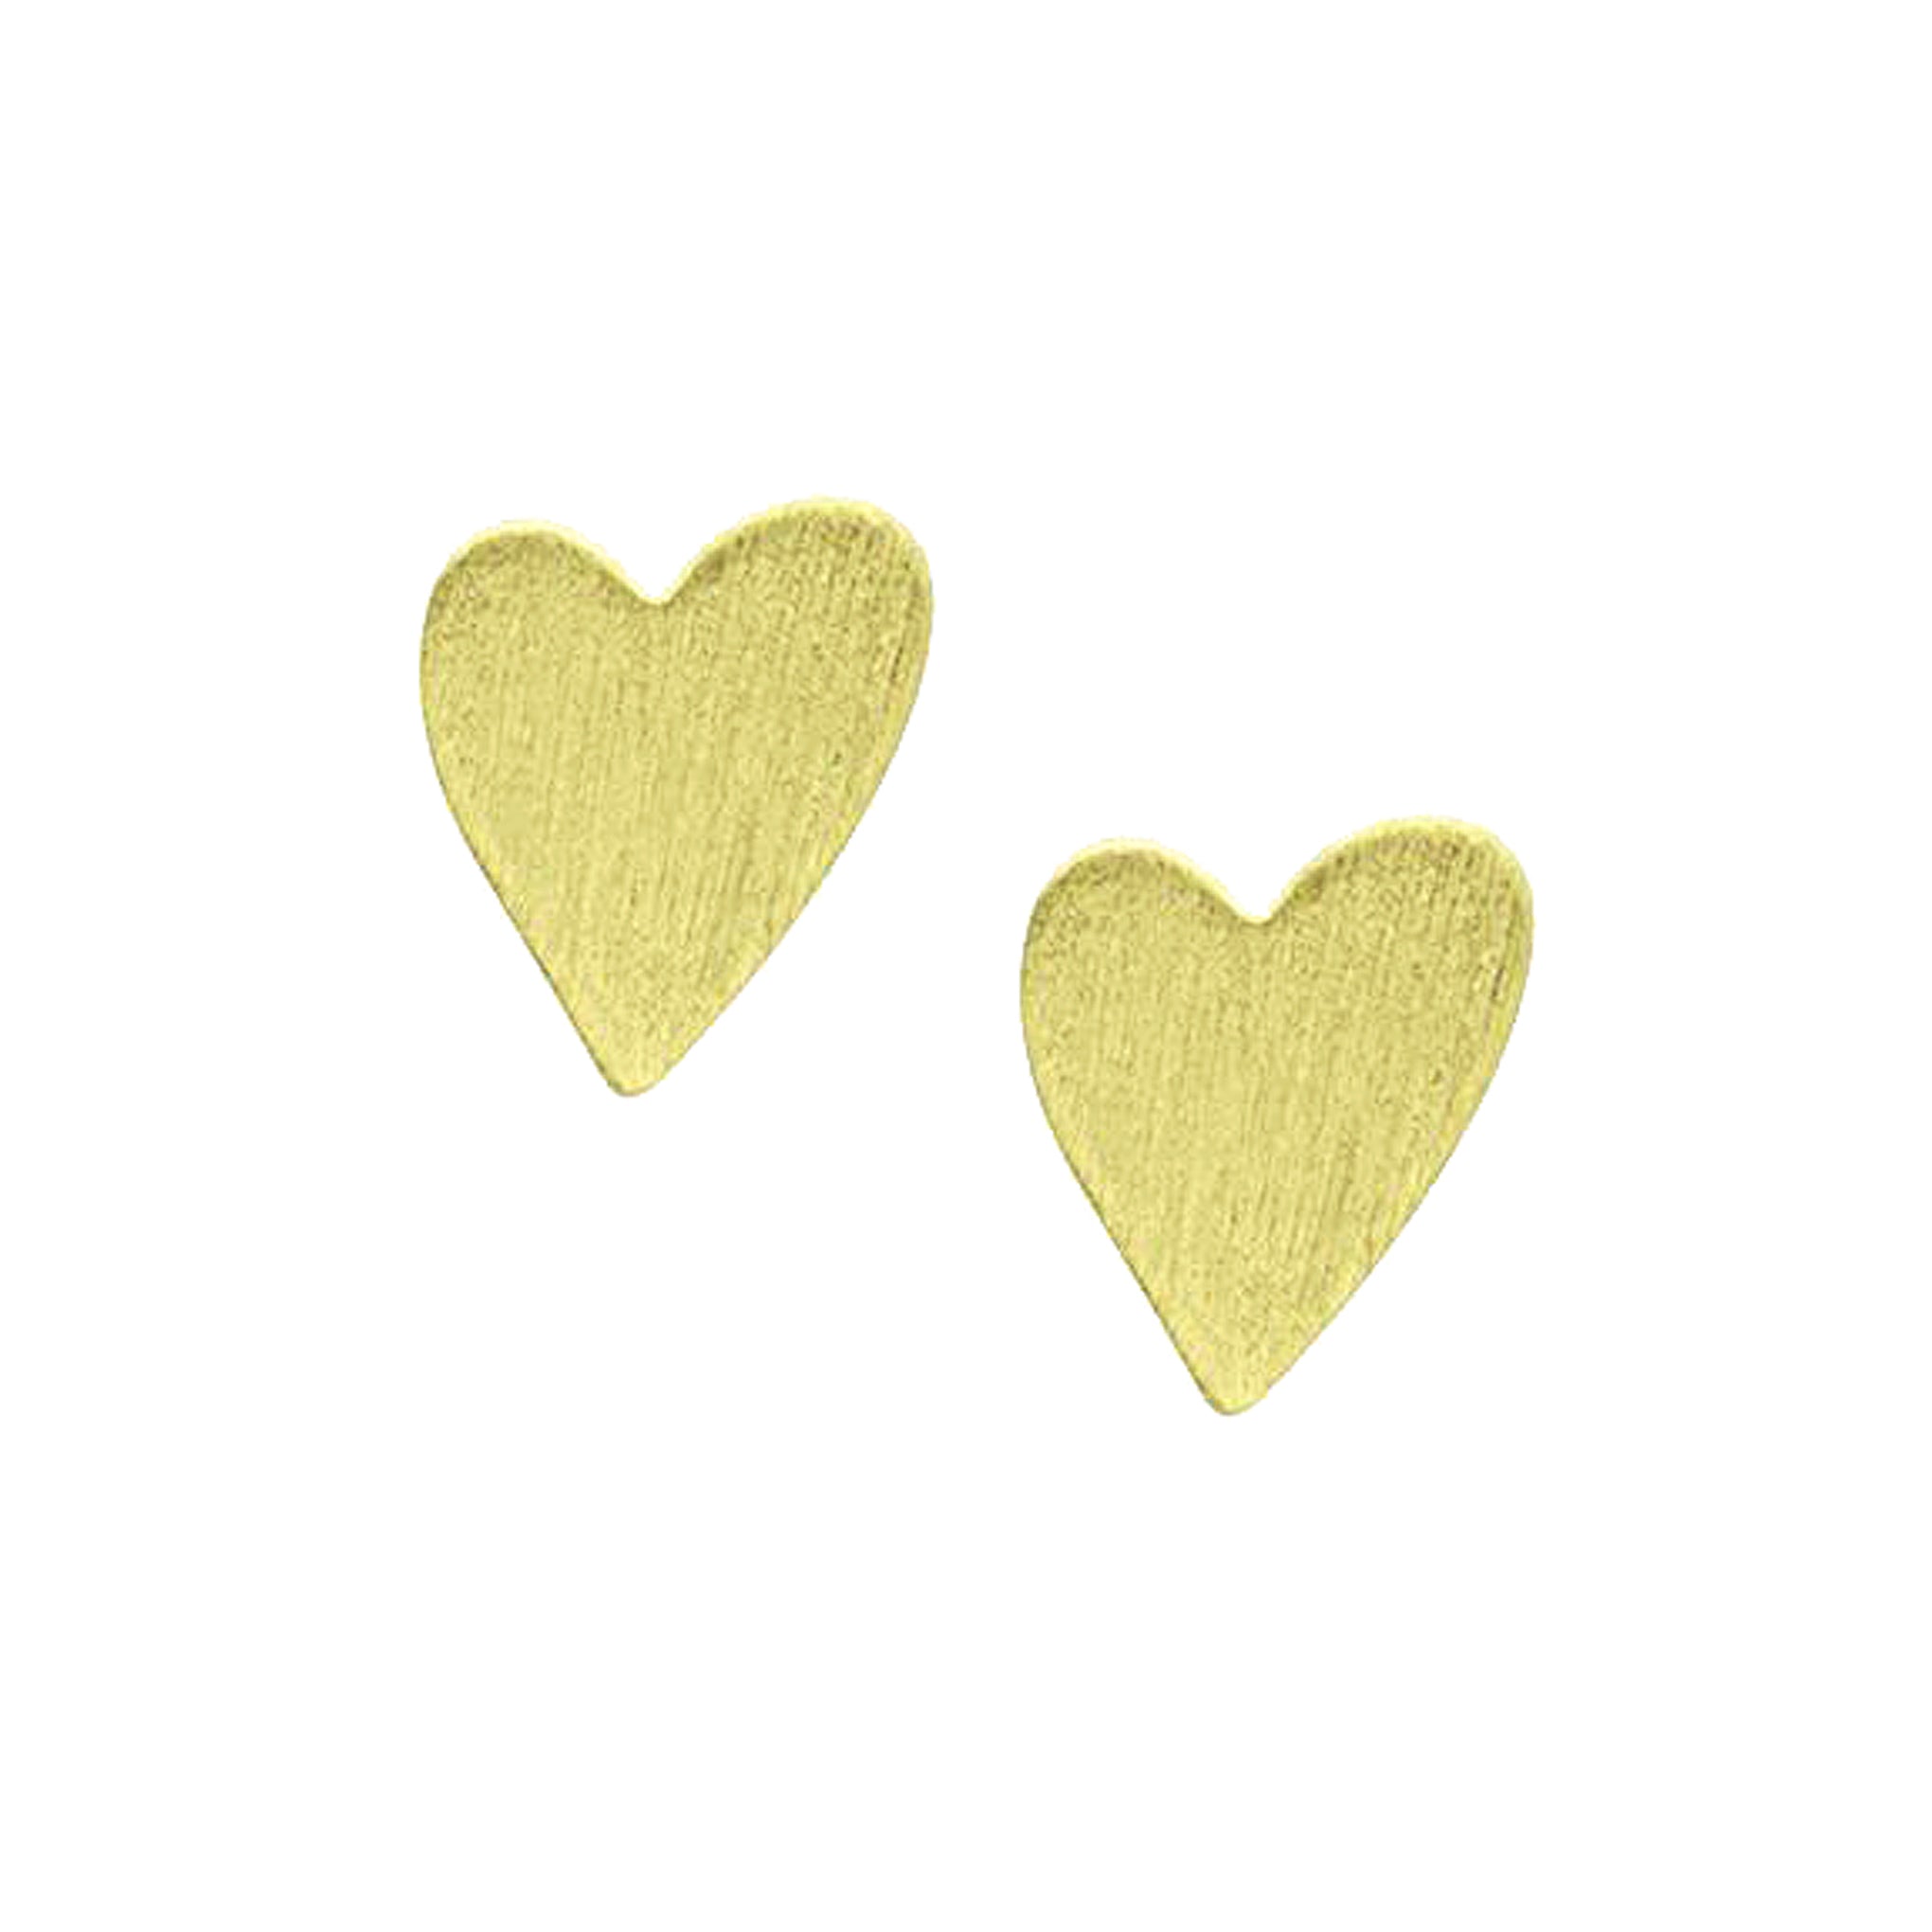 Sheila Fajl Amores Heart Stud Earrings in Brushed Gold Plated